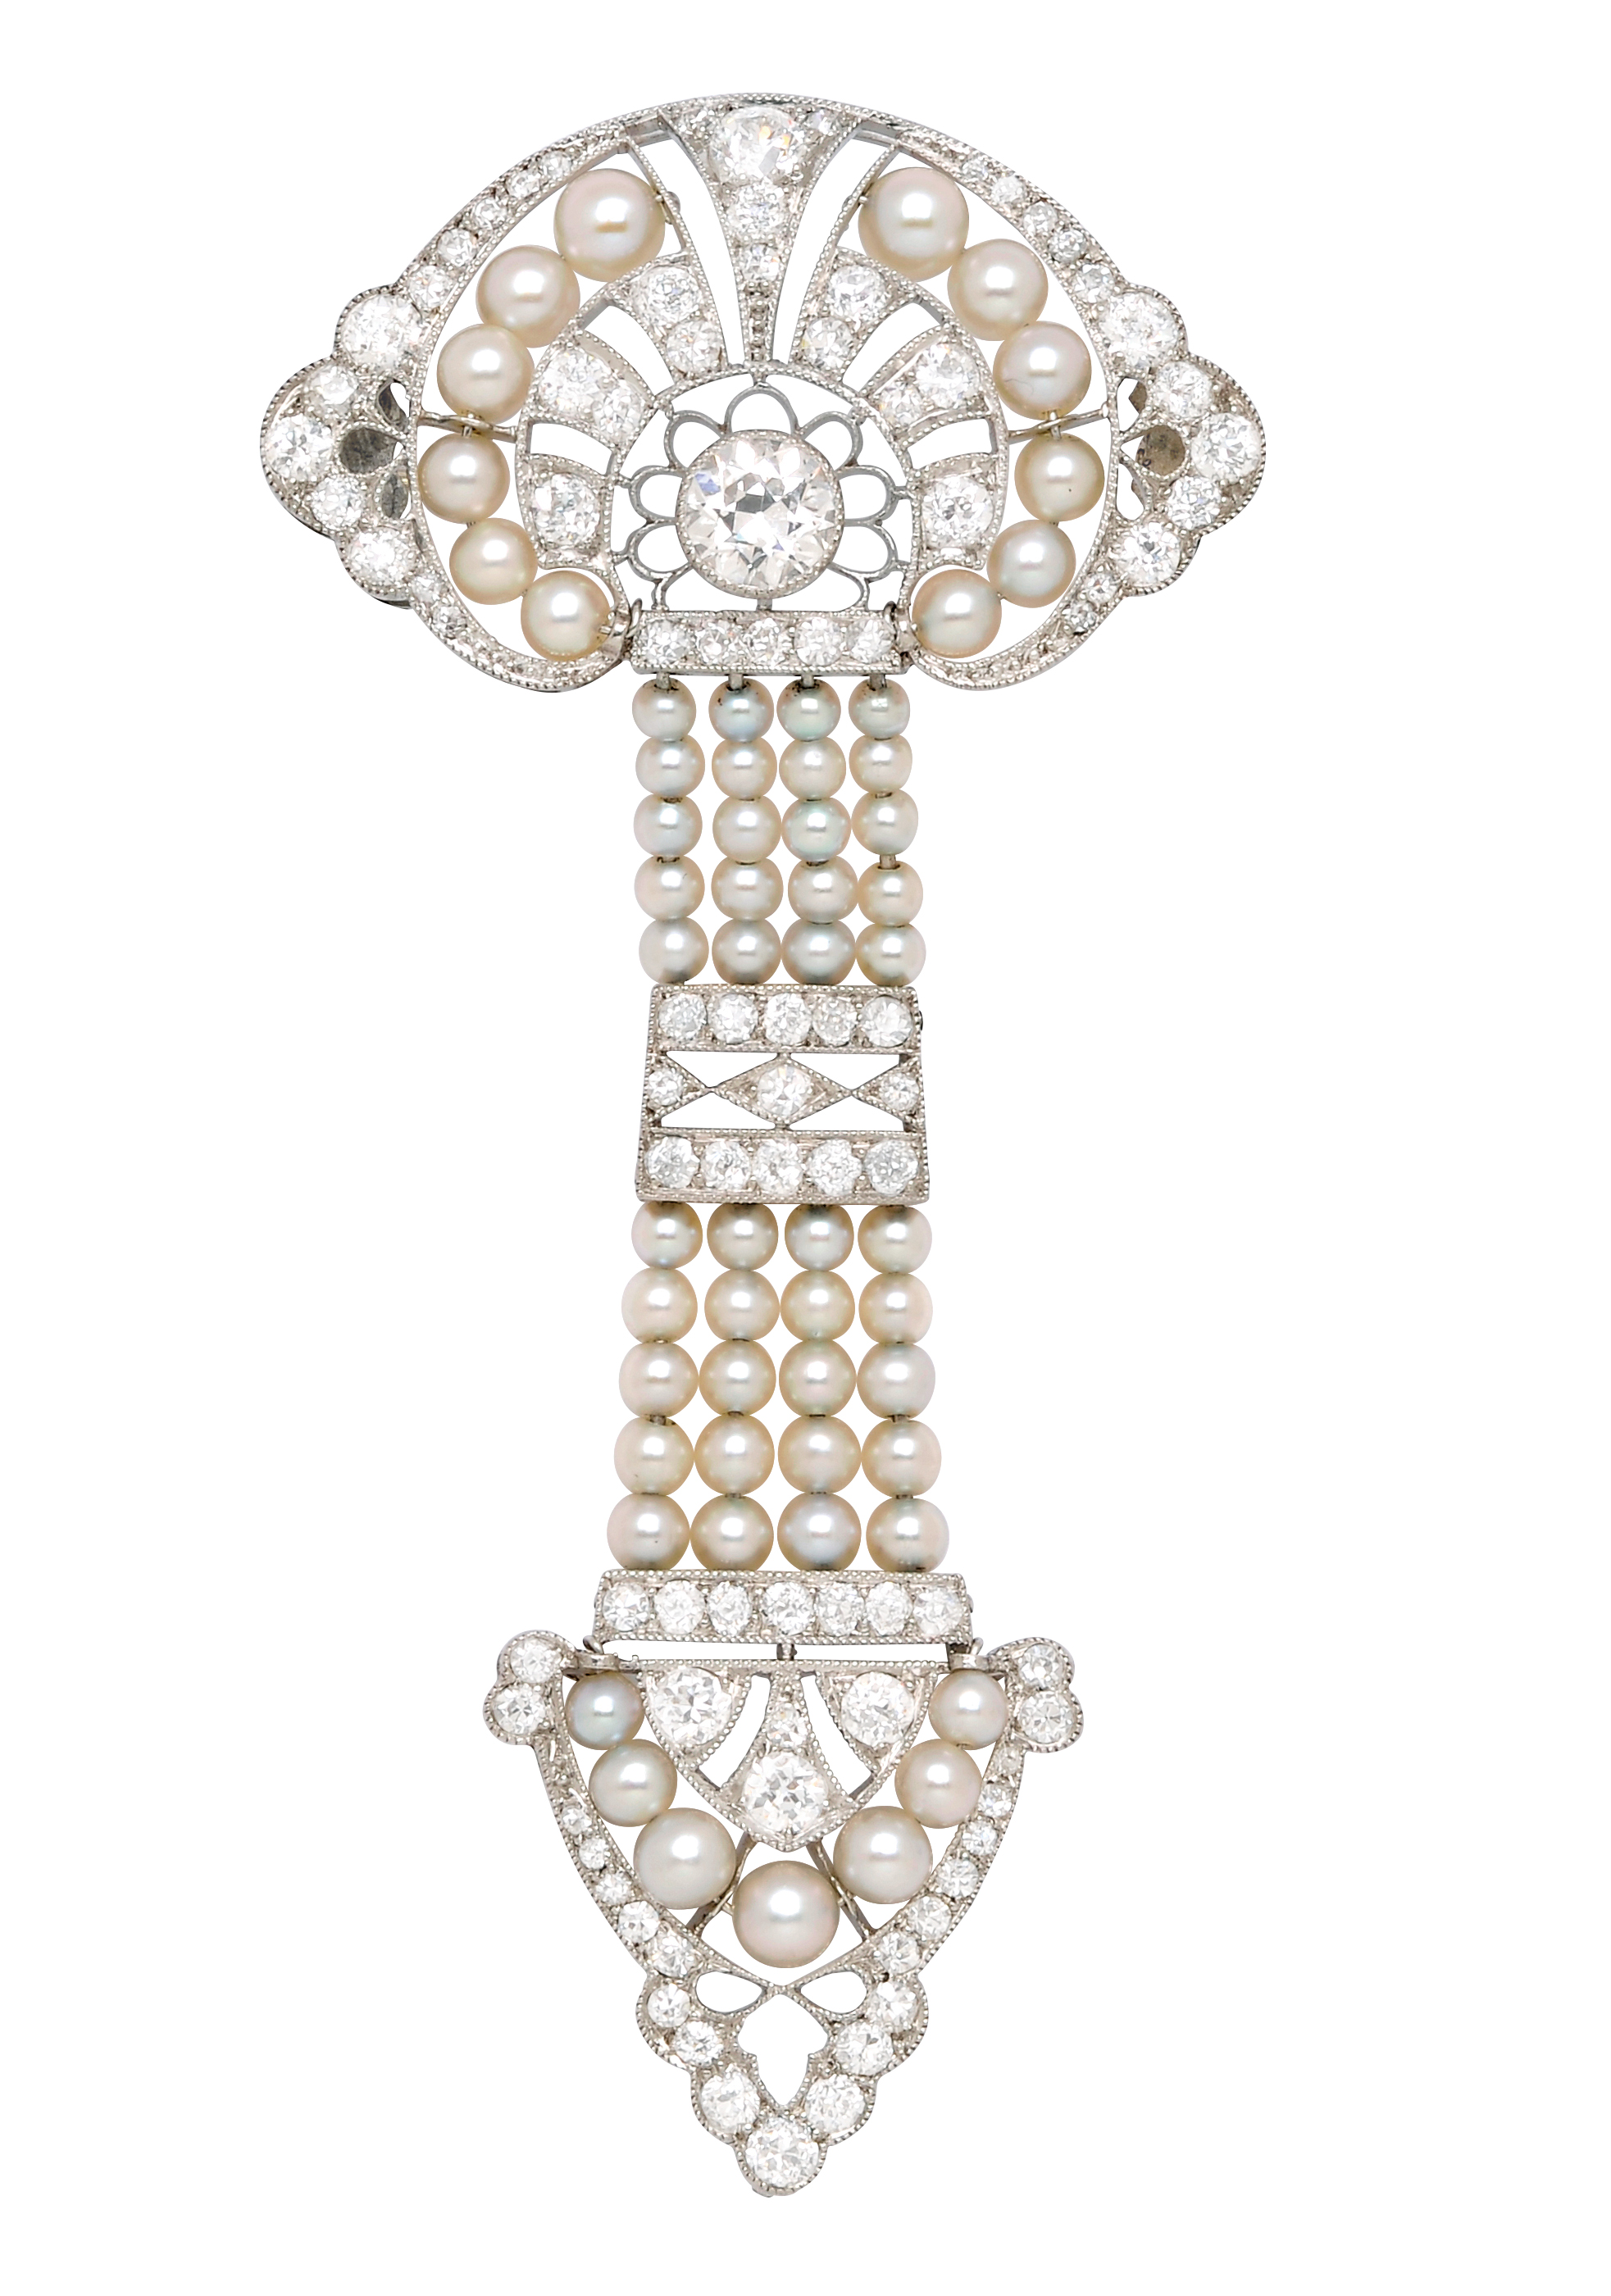 Belle Epoque Pearl and Diamond Brooch (Circa 1910): Lot 258, Spring 2014 sale